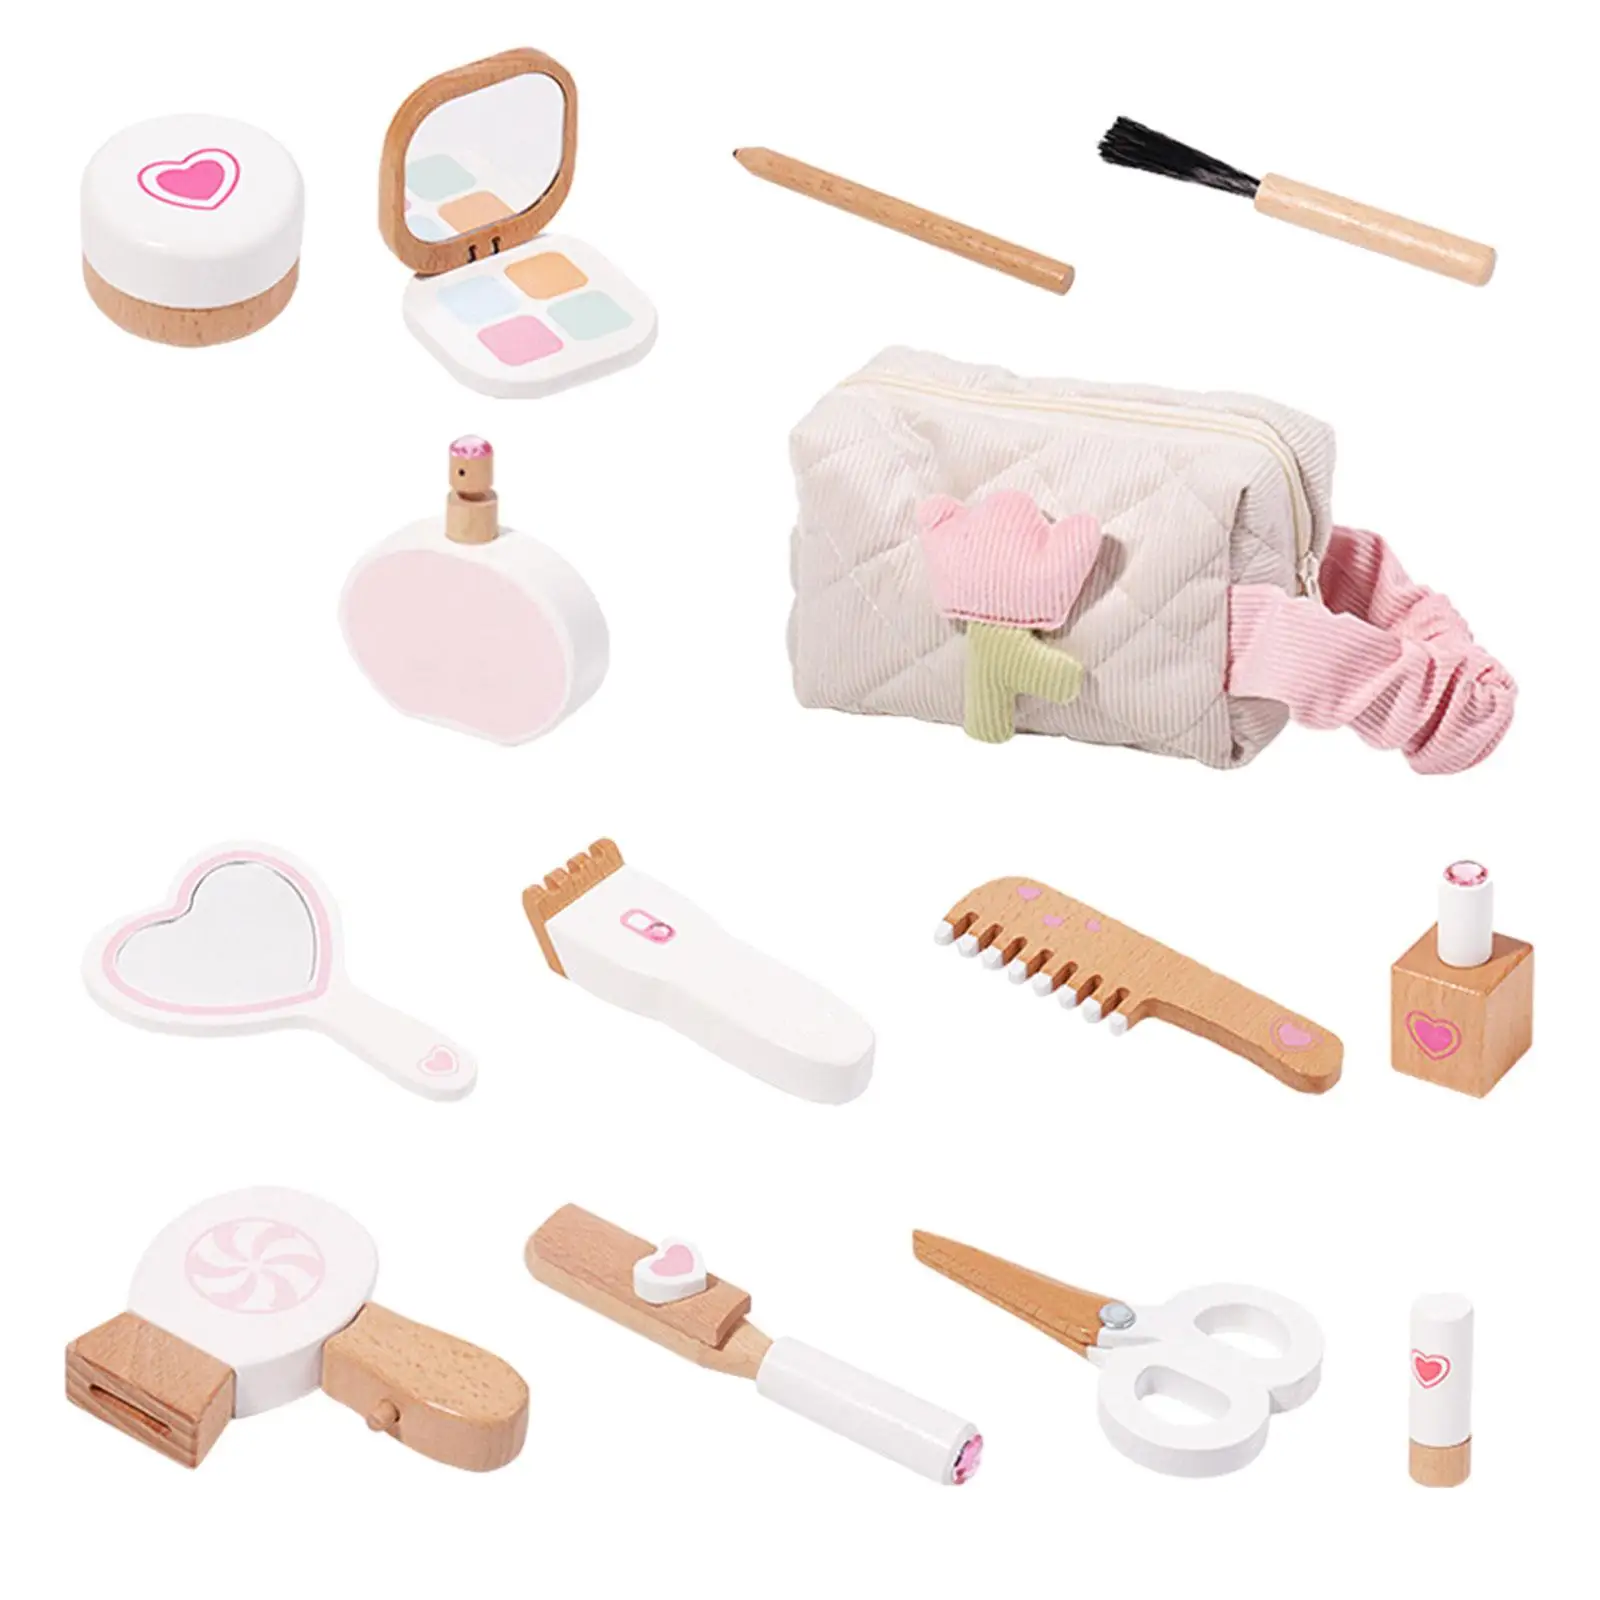 14 Pieces Play Makeup for Little Girls Pretend Makeup for Toddlers Children Toy Ages 3 over Makeup Kits for Girls for Festivals